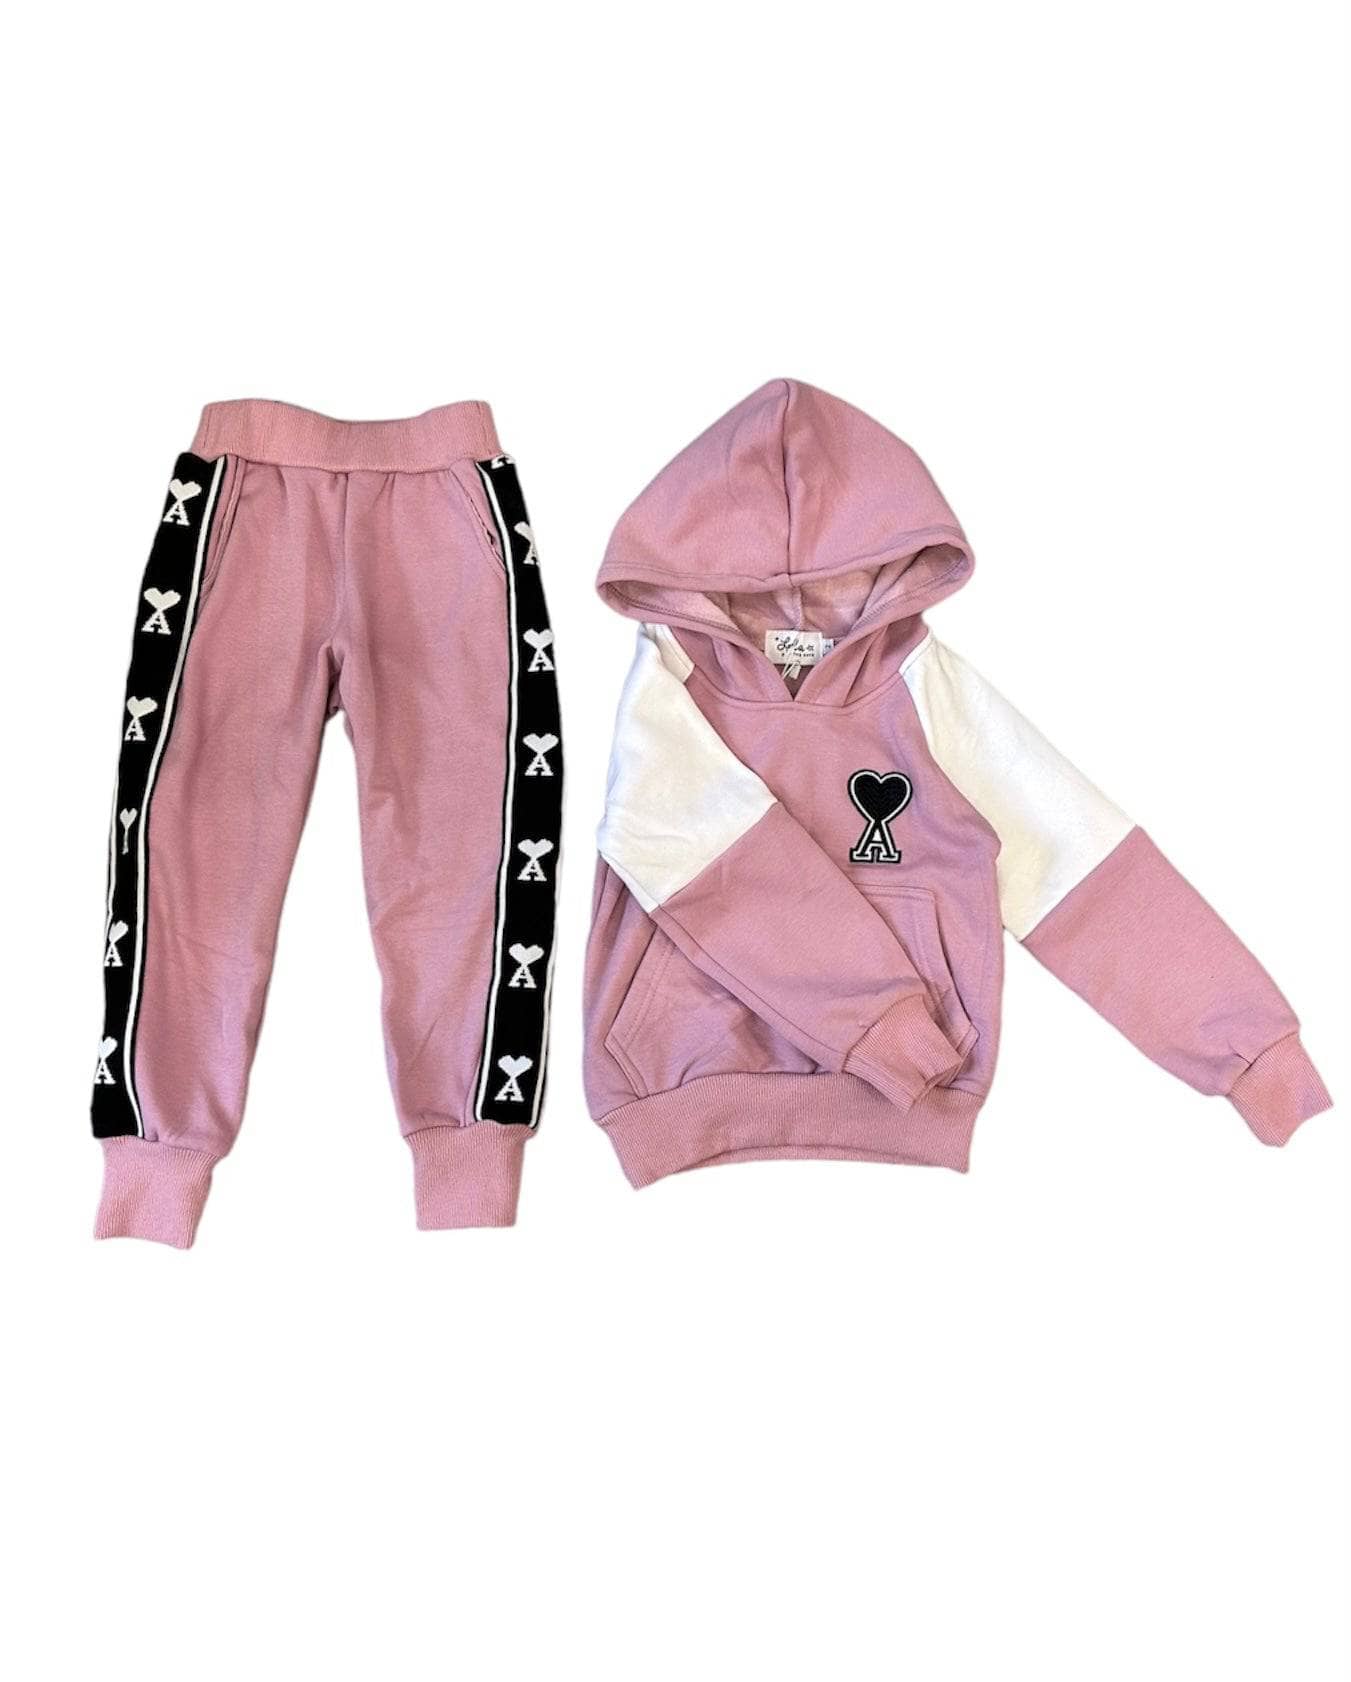 Ace of Hearts Pink Set